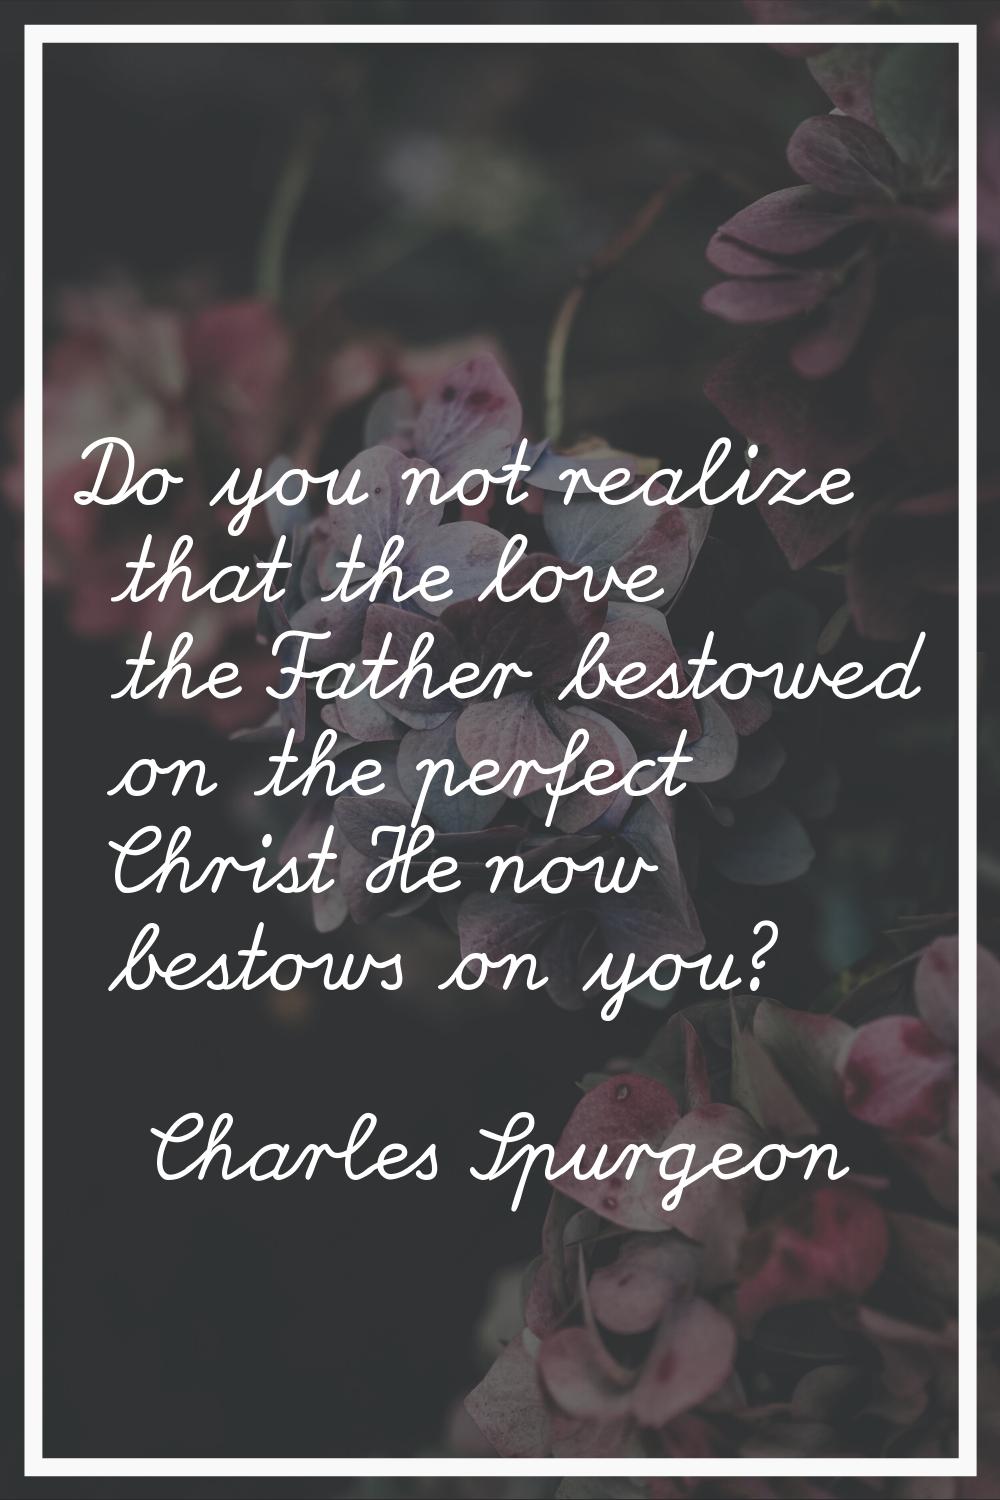 Do you not realize that the love the Father bestowed on the perfect Christ He now bestows on you?